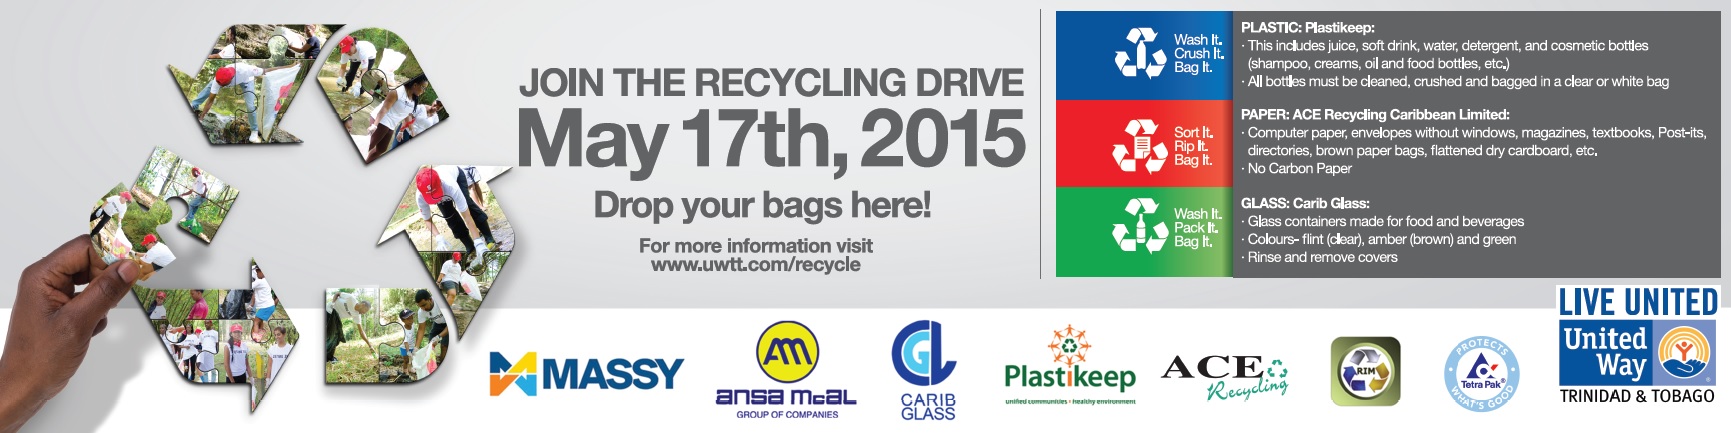 Recycling Drive Banner